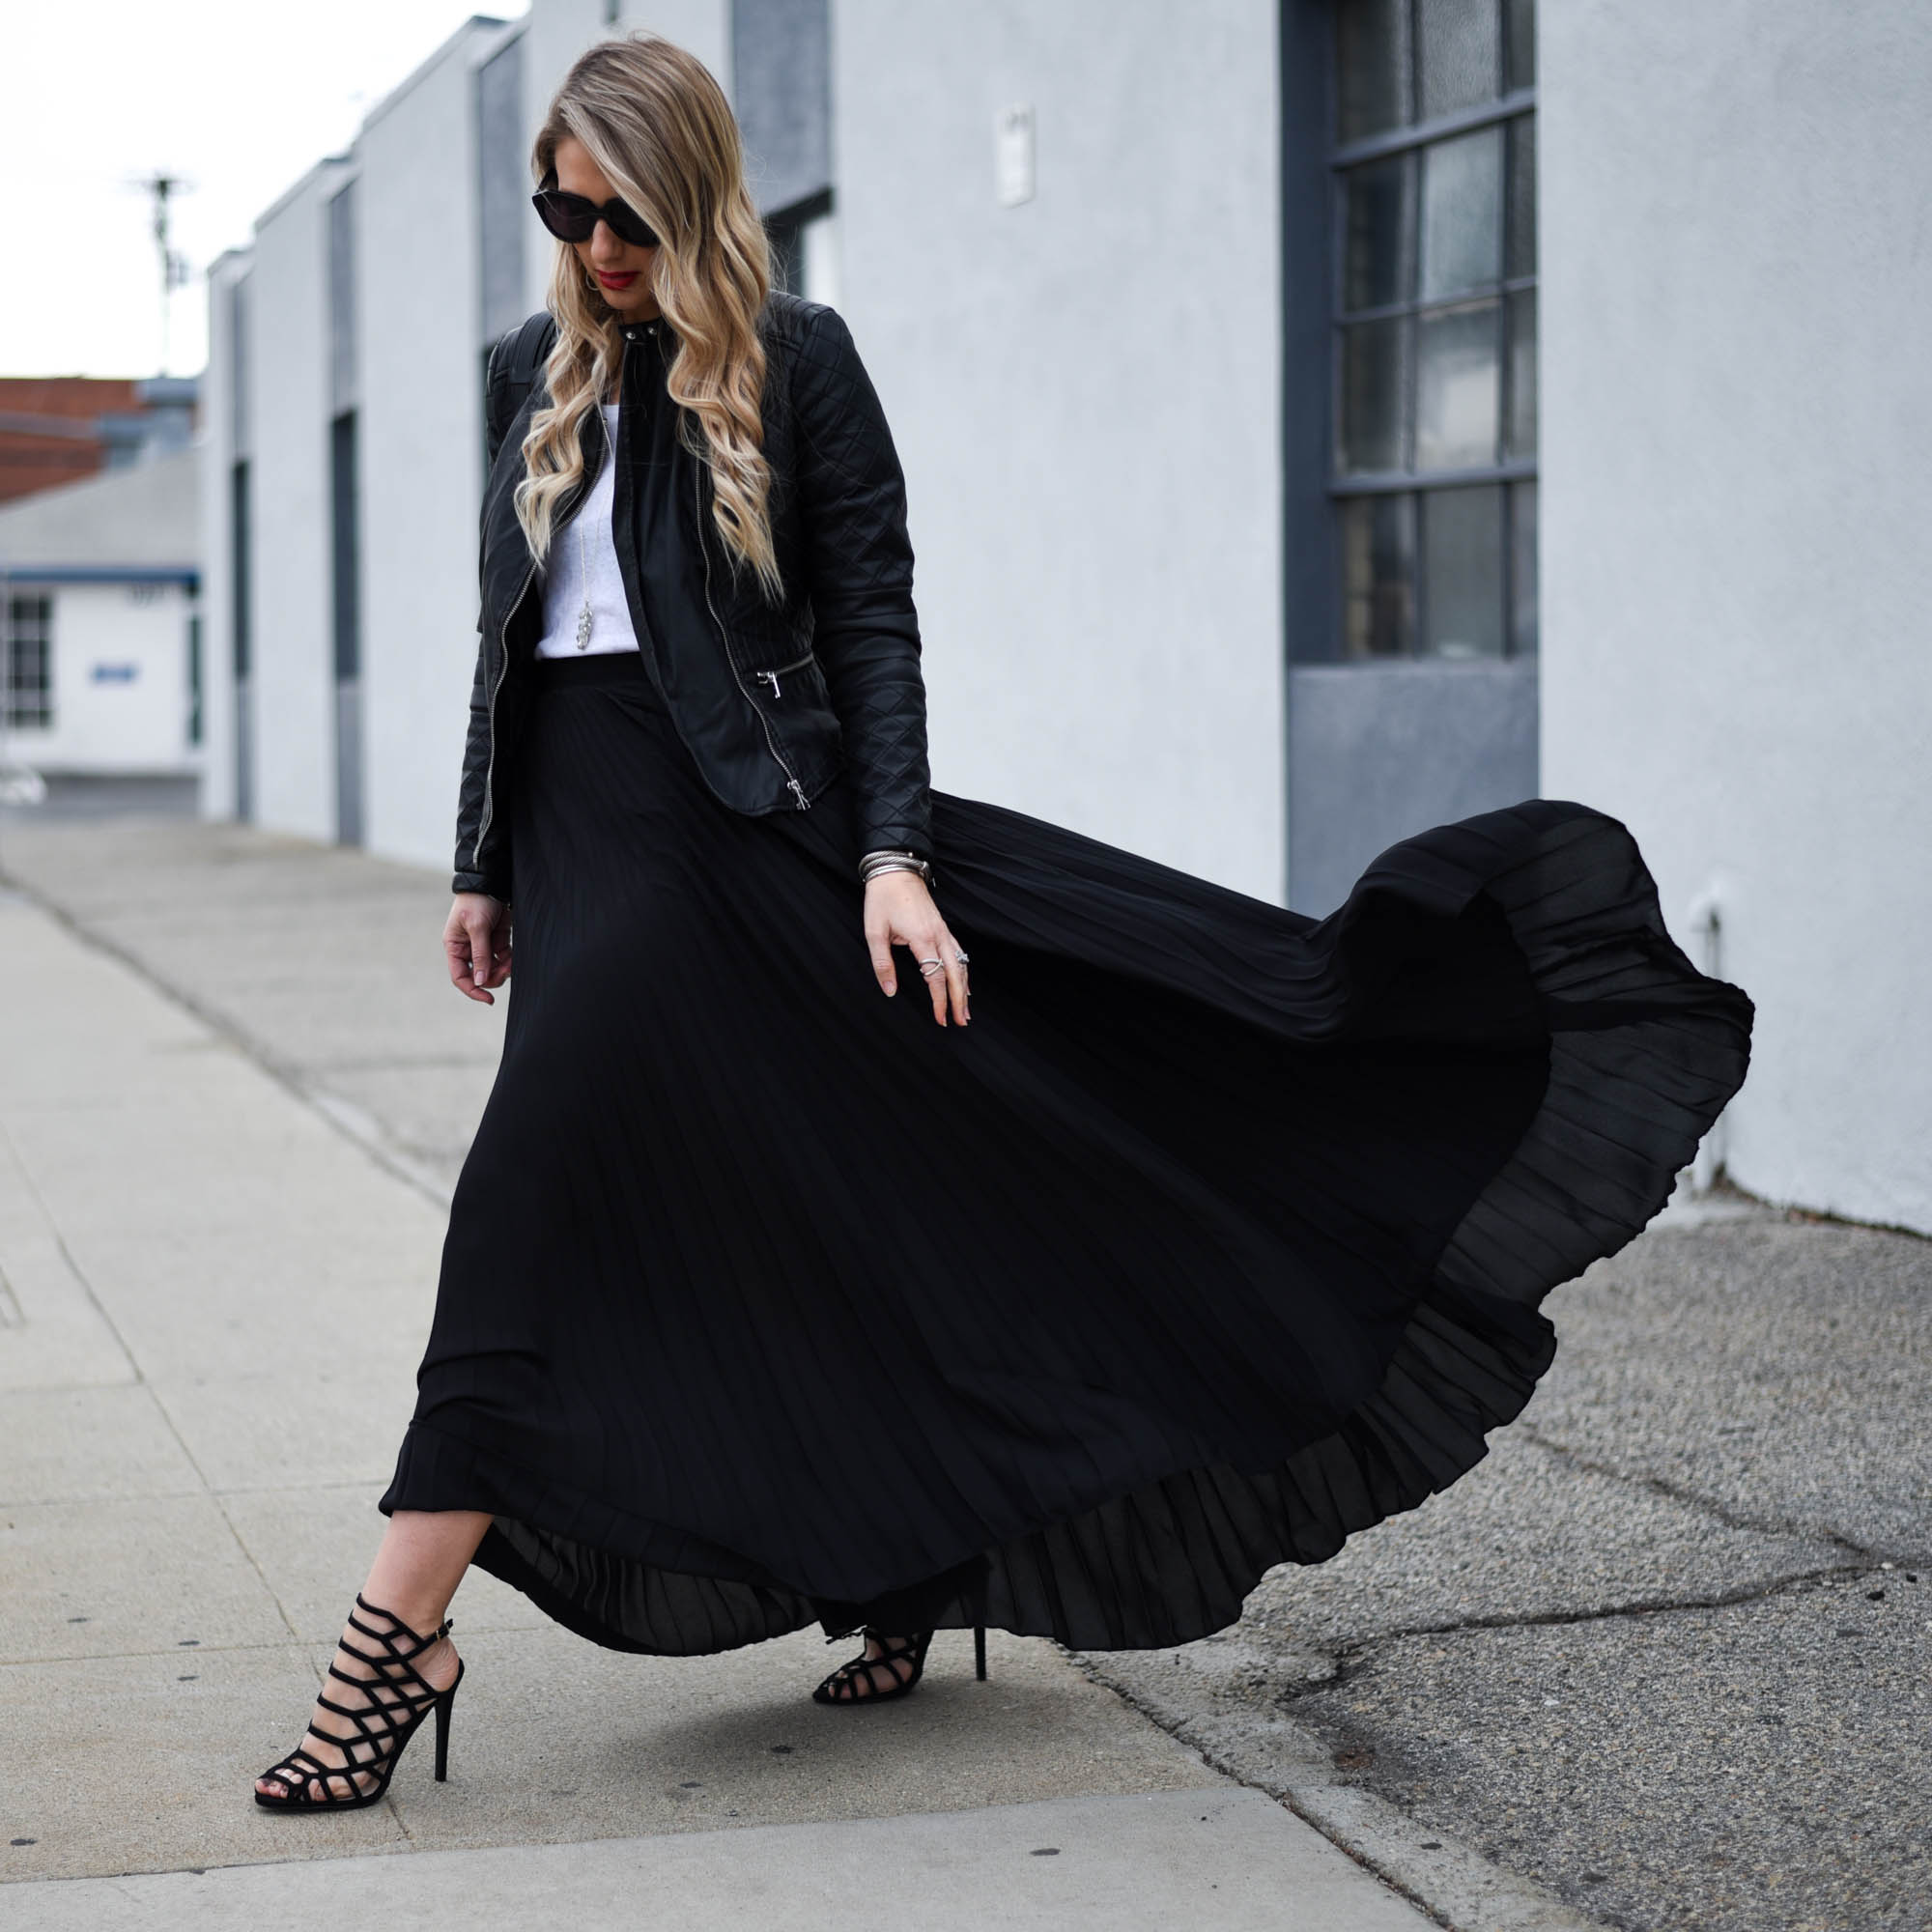 Visions of Vogue - Pleated Leather 9 - 5 Date Night Outfits He Wants You to Wear by Chicago style blogger Visions of Vogue